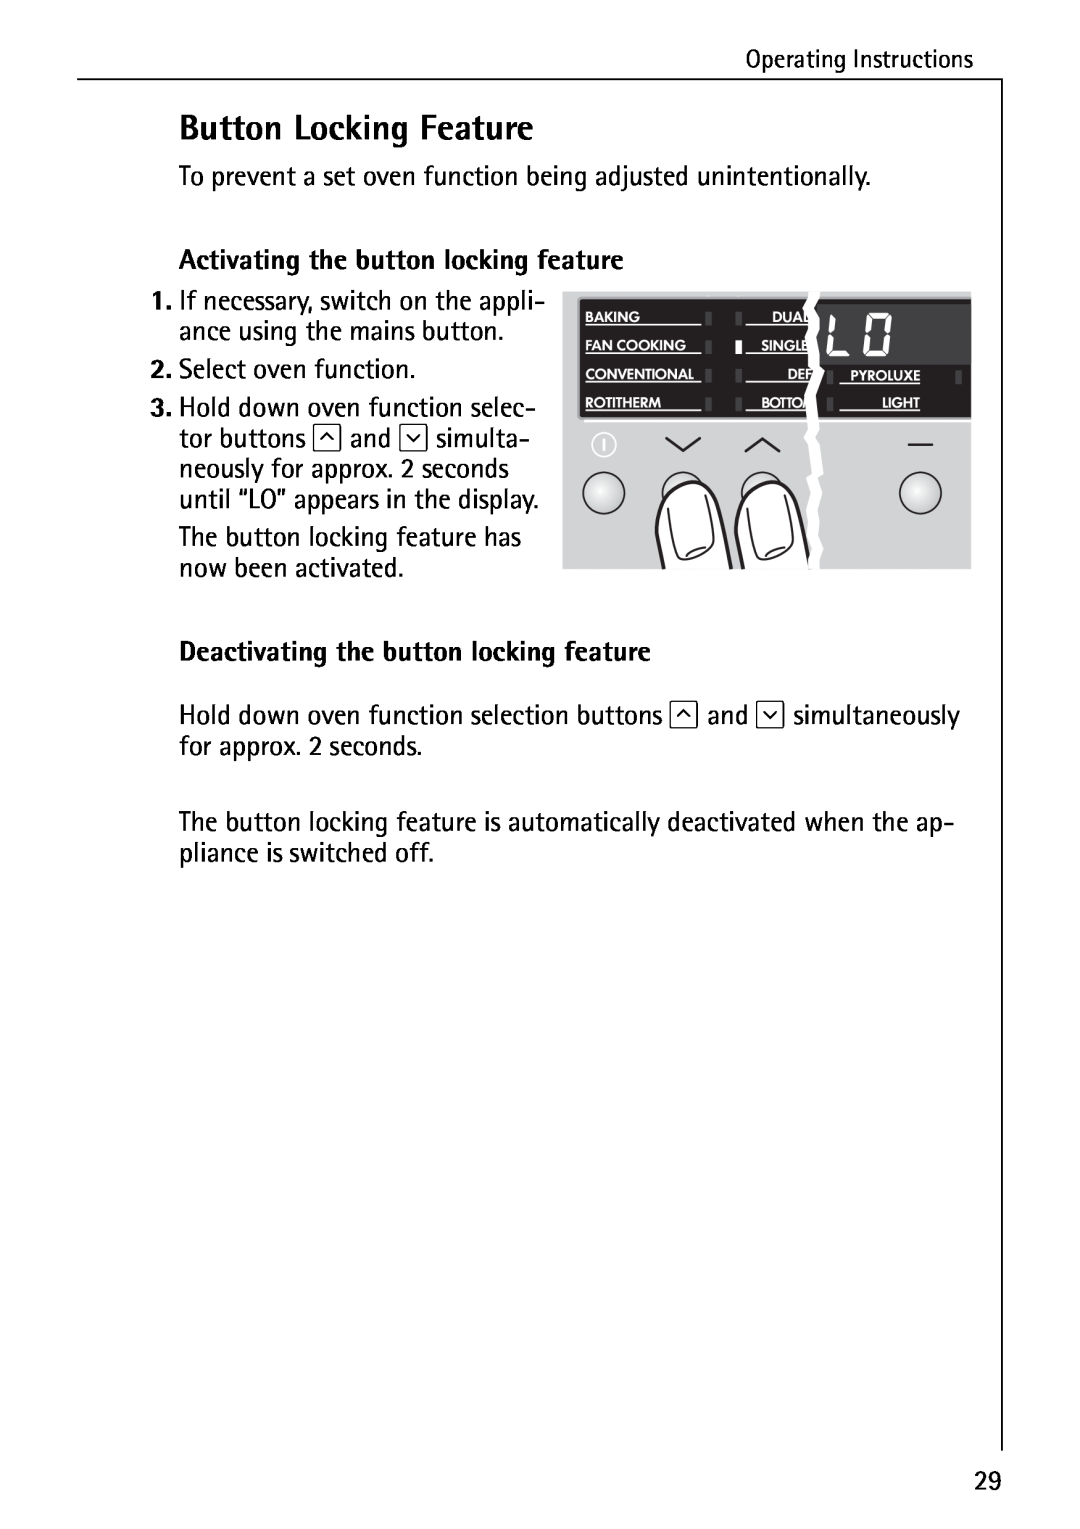 Electrolux B6140-1 Button Locking Feature, Activating the button locking feature, Deactivating the button locking feature 